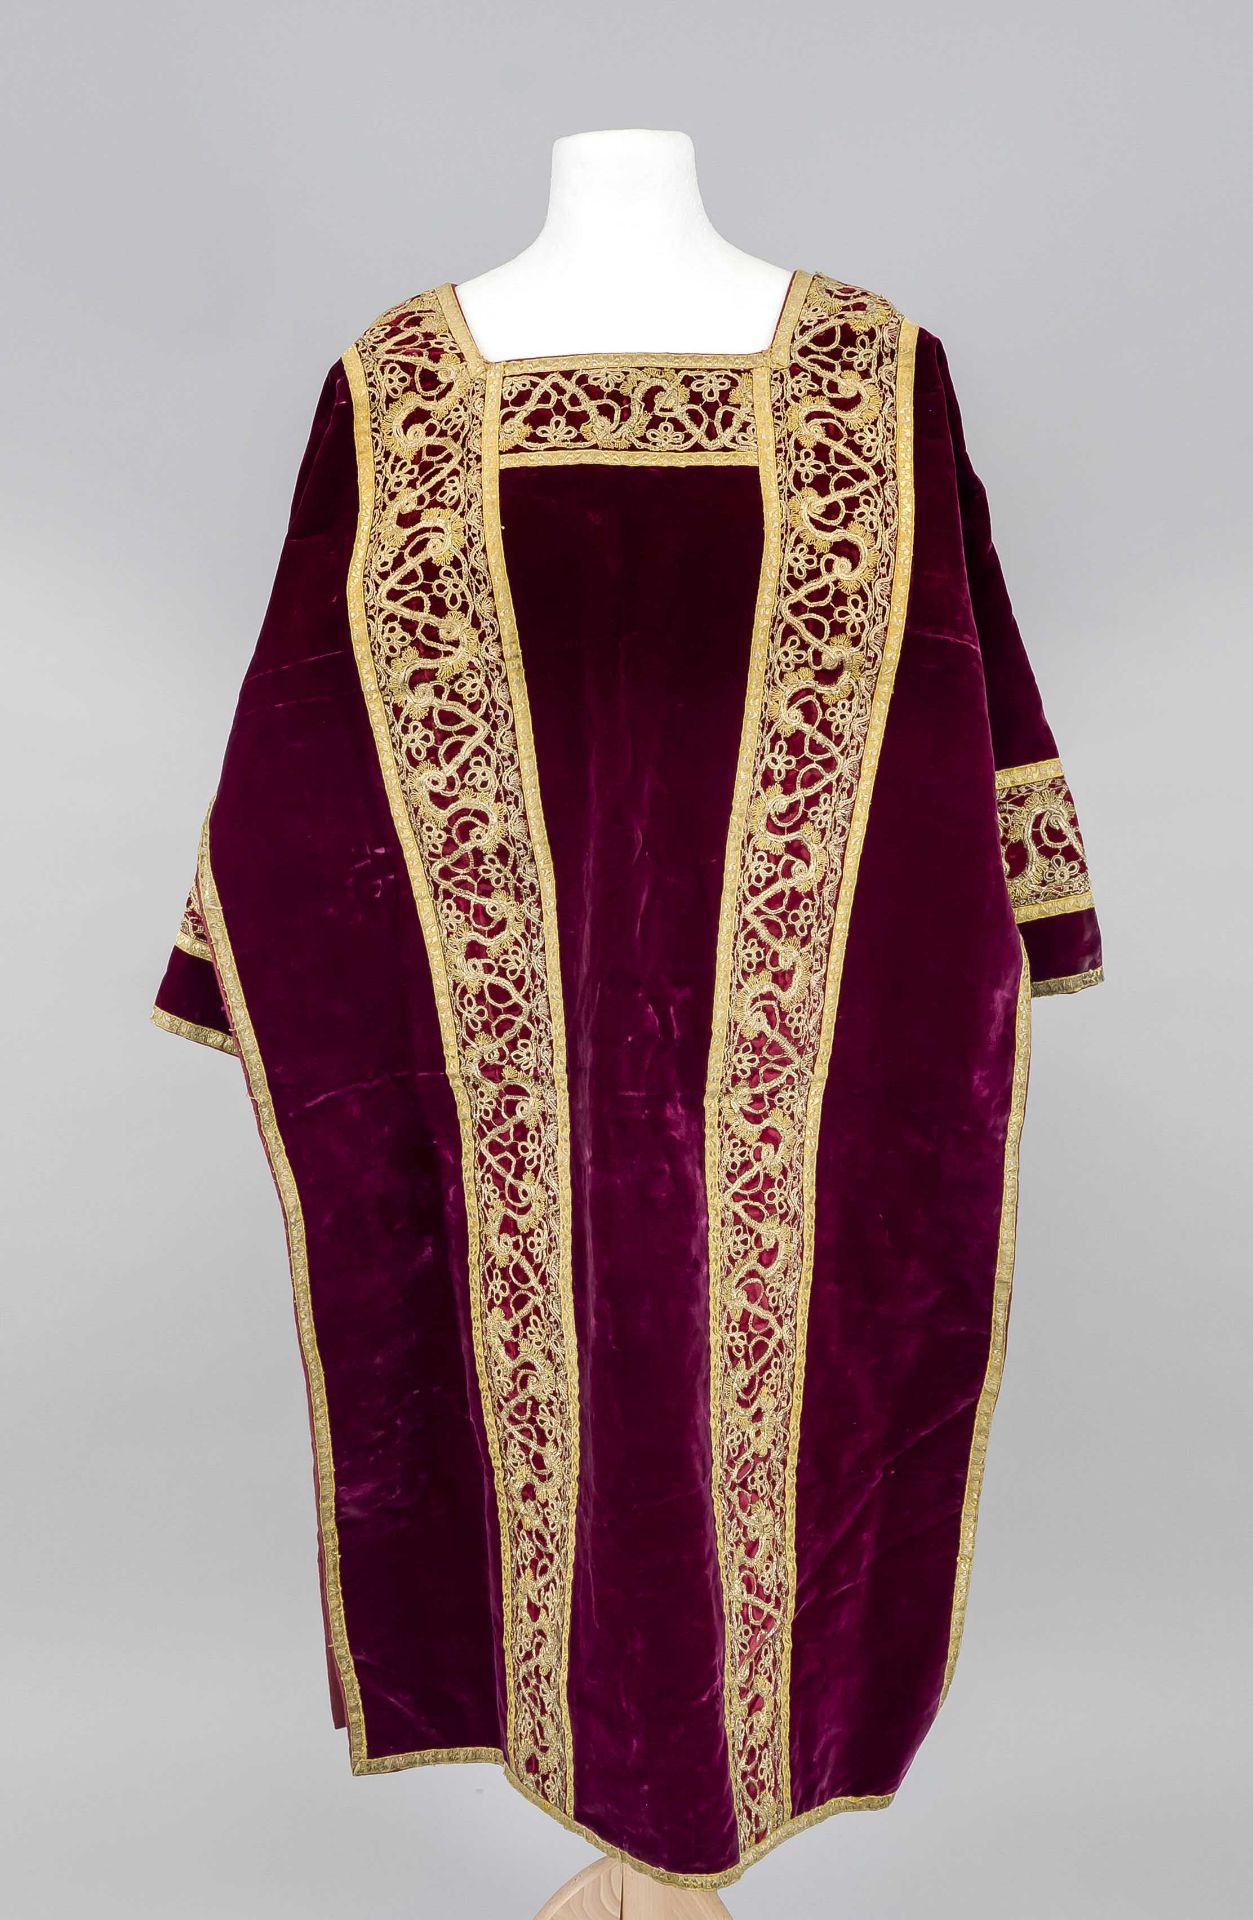 Lithurgical vestment for the Roman Catholic rite (chasuble), probably 19th century, dark wine-red